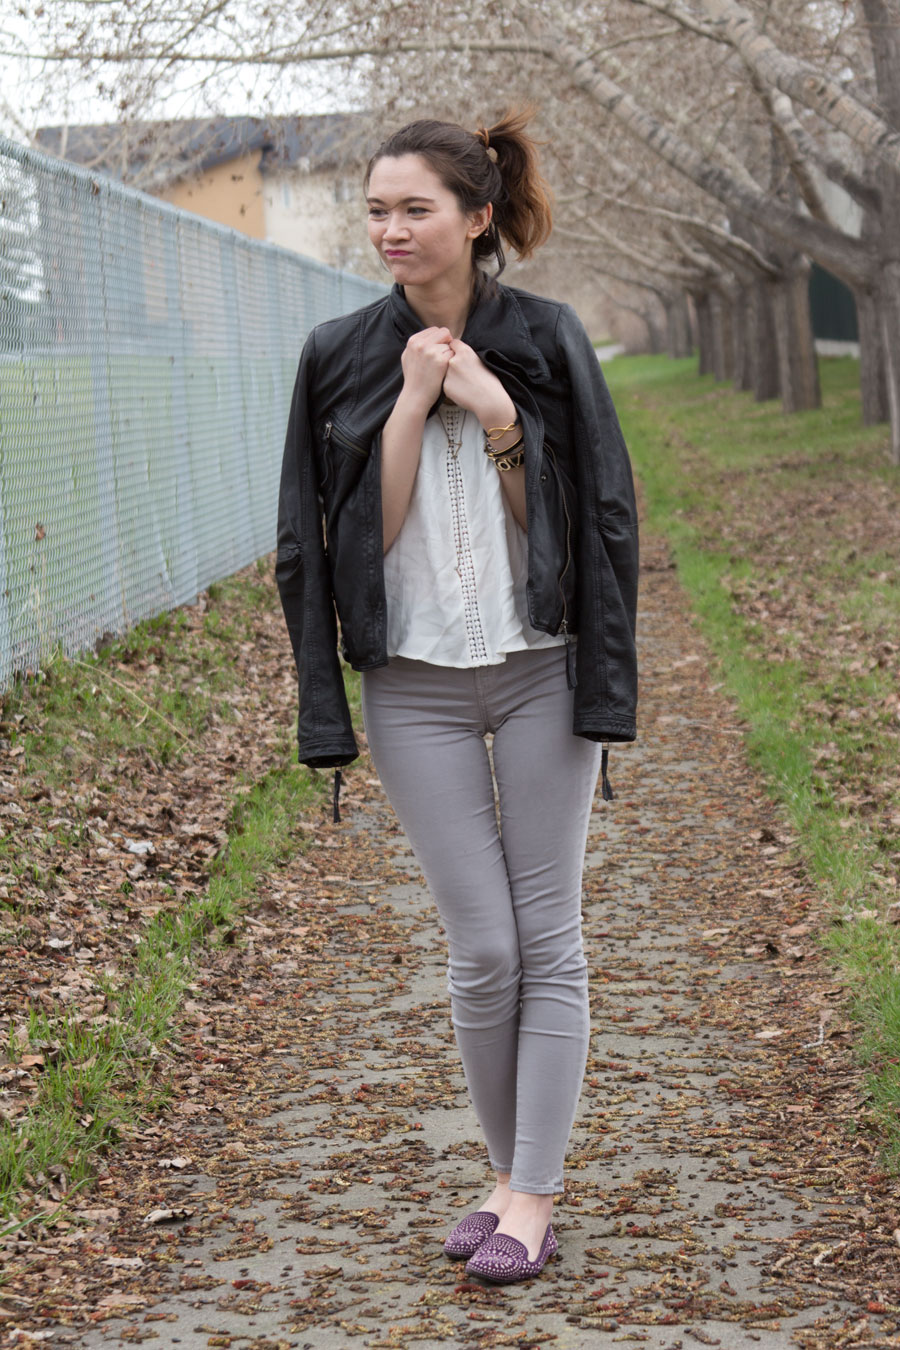 BCBGENERATION, J Brand, Spring Fashion, Nasty Gal, Juicy Couture, ASOS, leather jacket, grey jeans, Danier